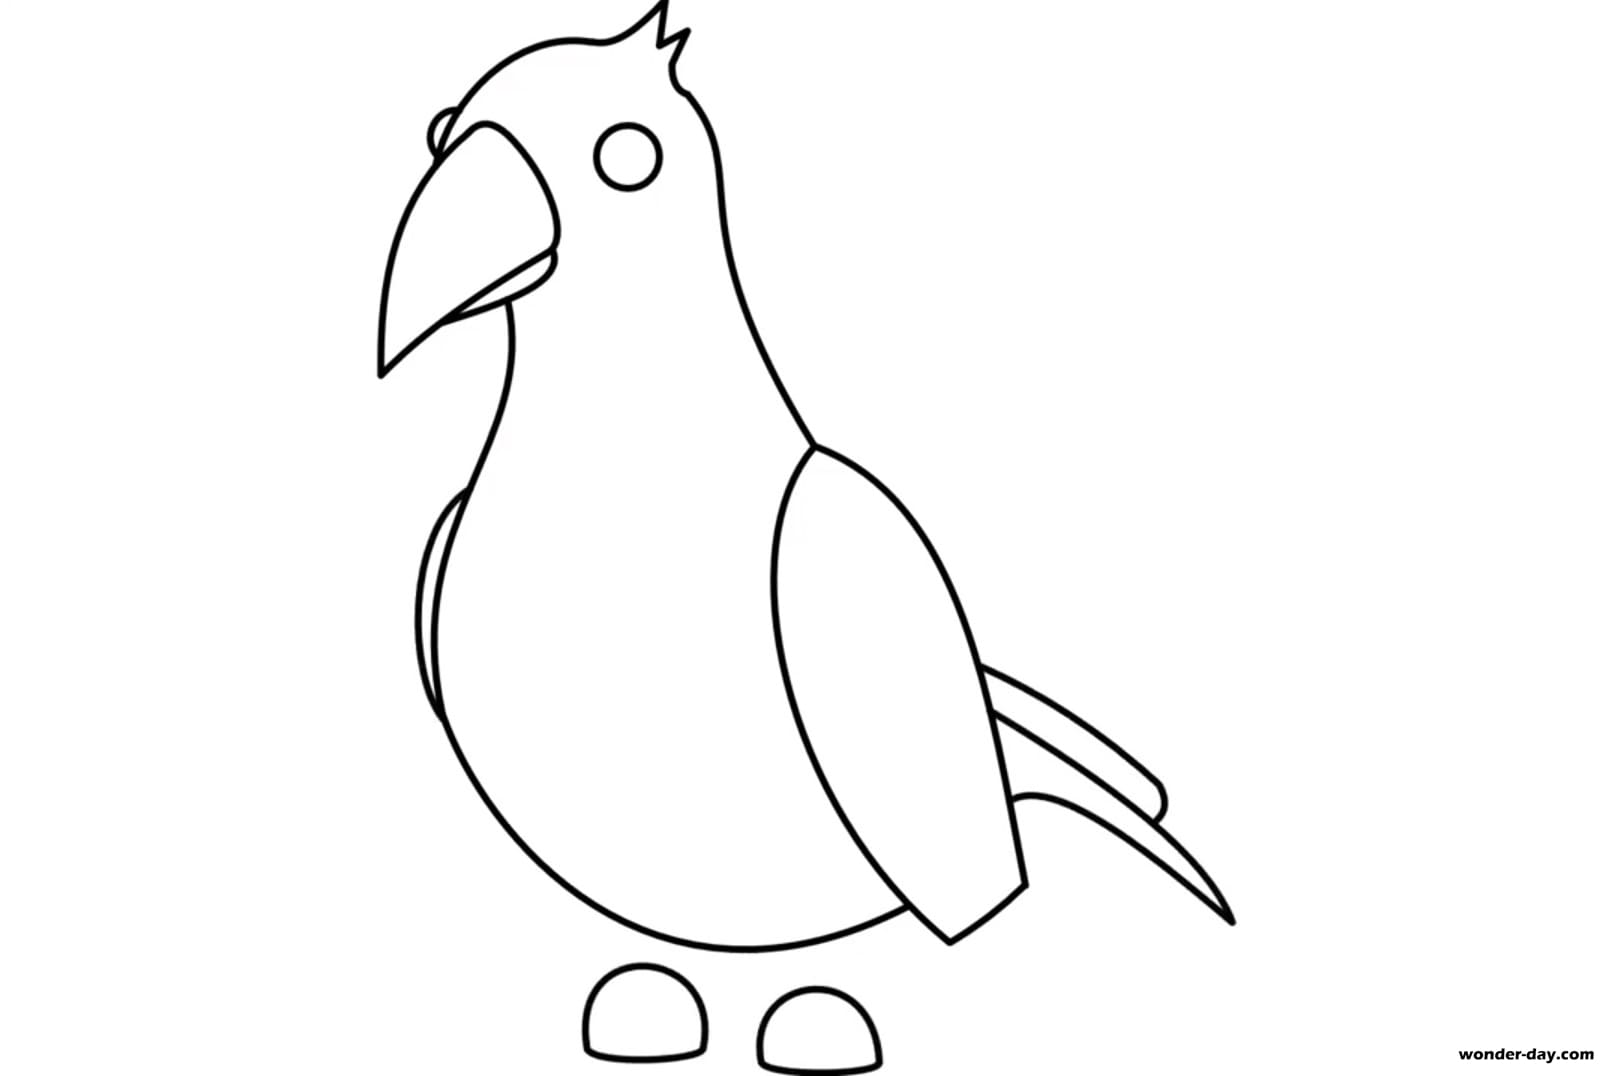 Coloring Pages Adopt Me Print For Free Wonder Day Com - magical penguin gave me special eggs in adopt me roblox